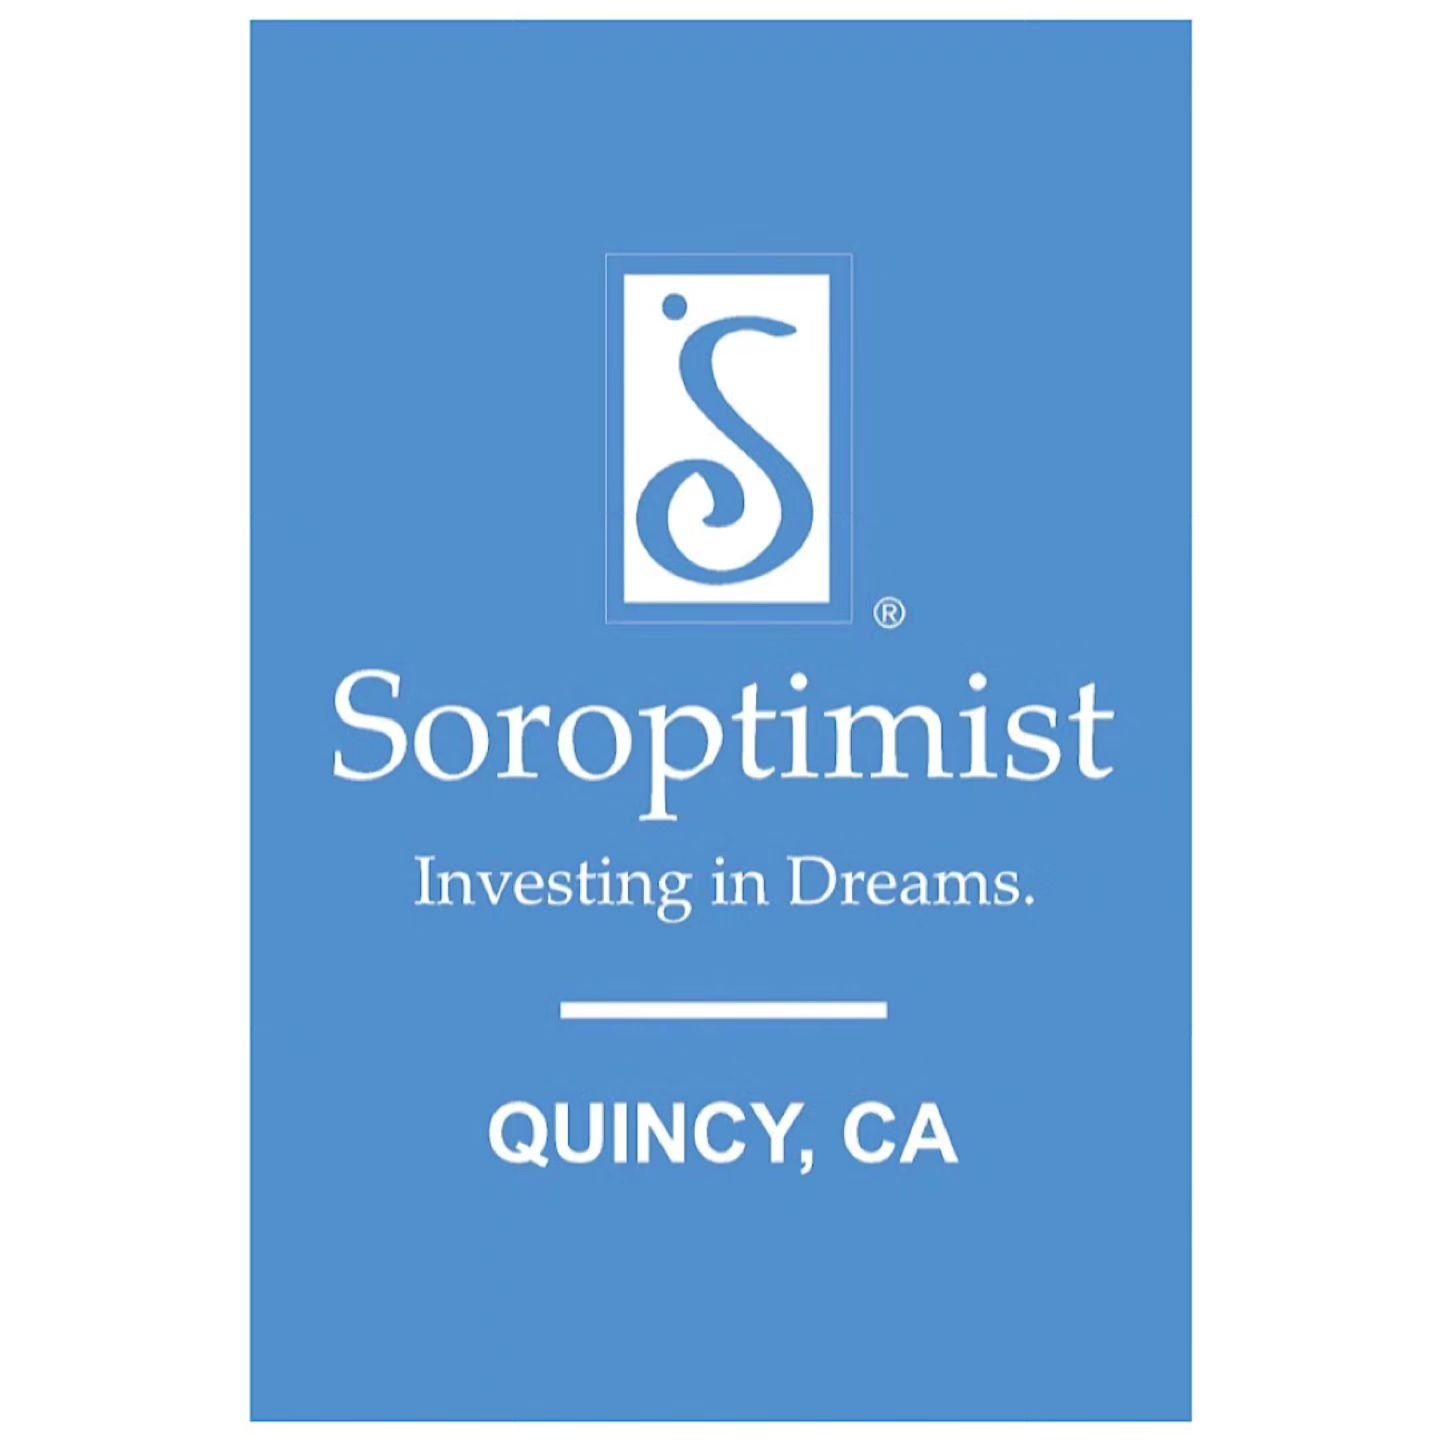 The second donation of the season for the High Sierra Foundation will be benefiting the very deserving Soroptimist International Quincy CA.

Soroptimist International is a global volunteer organization that works to improve the lives of women and gir